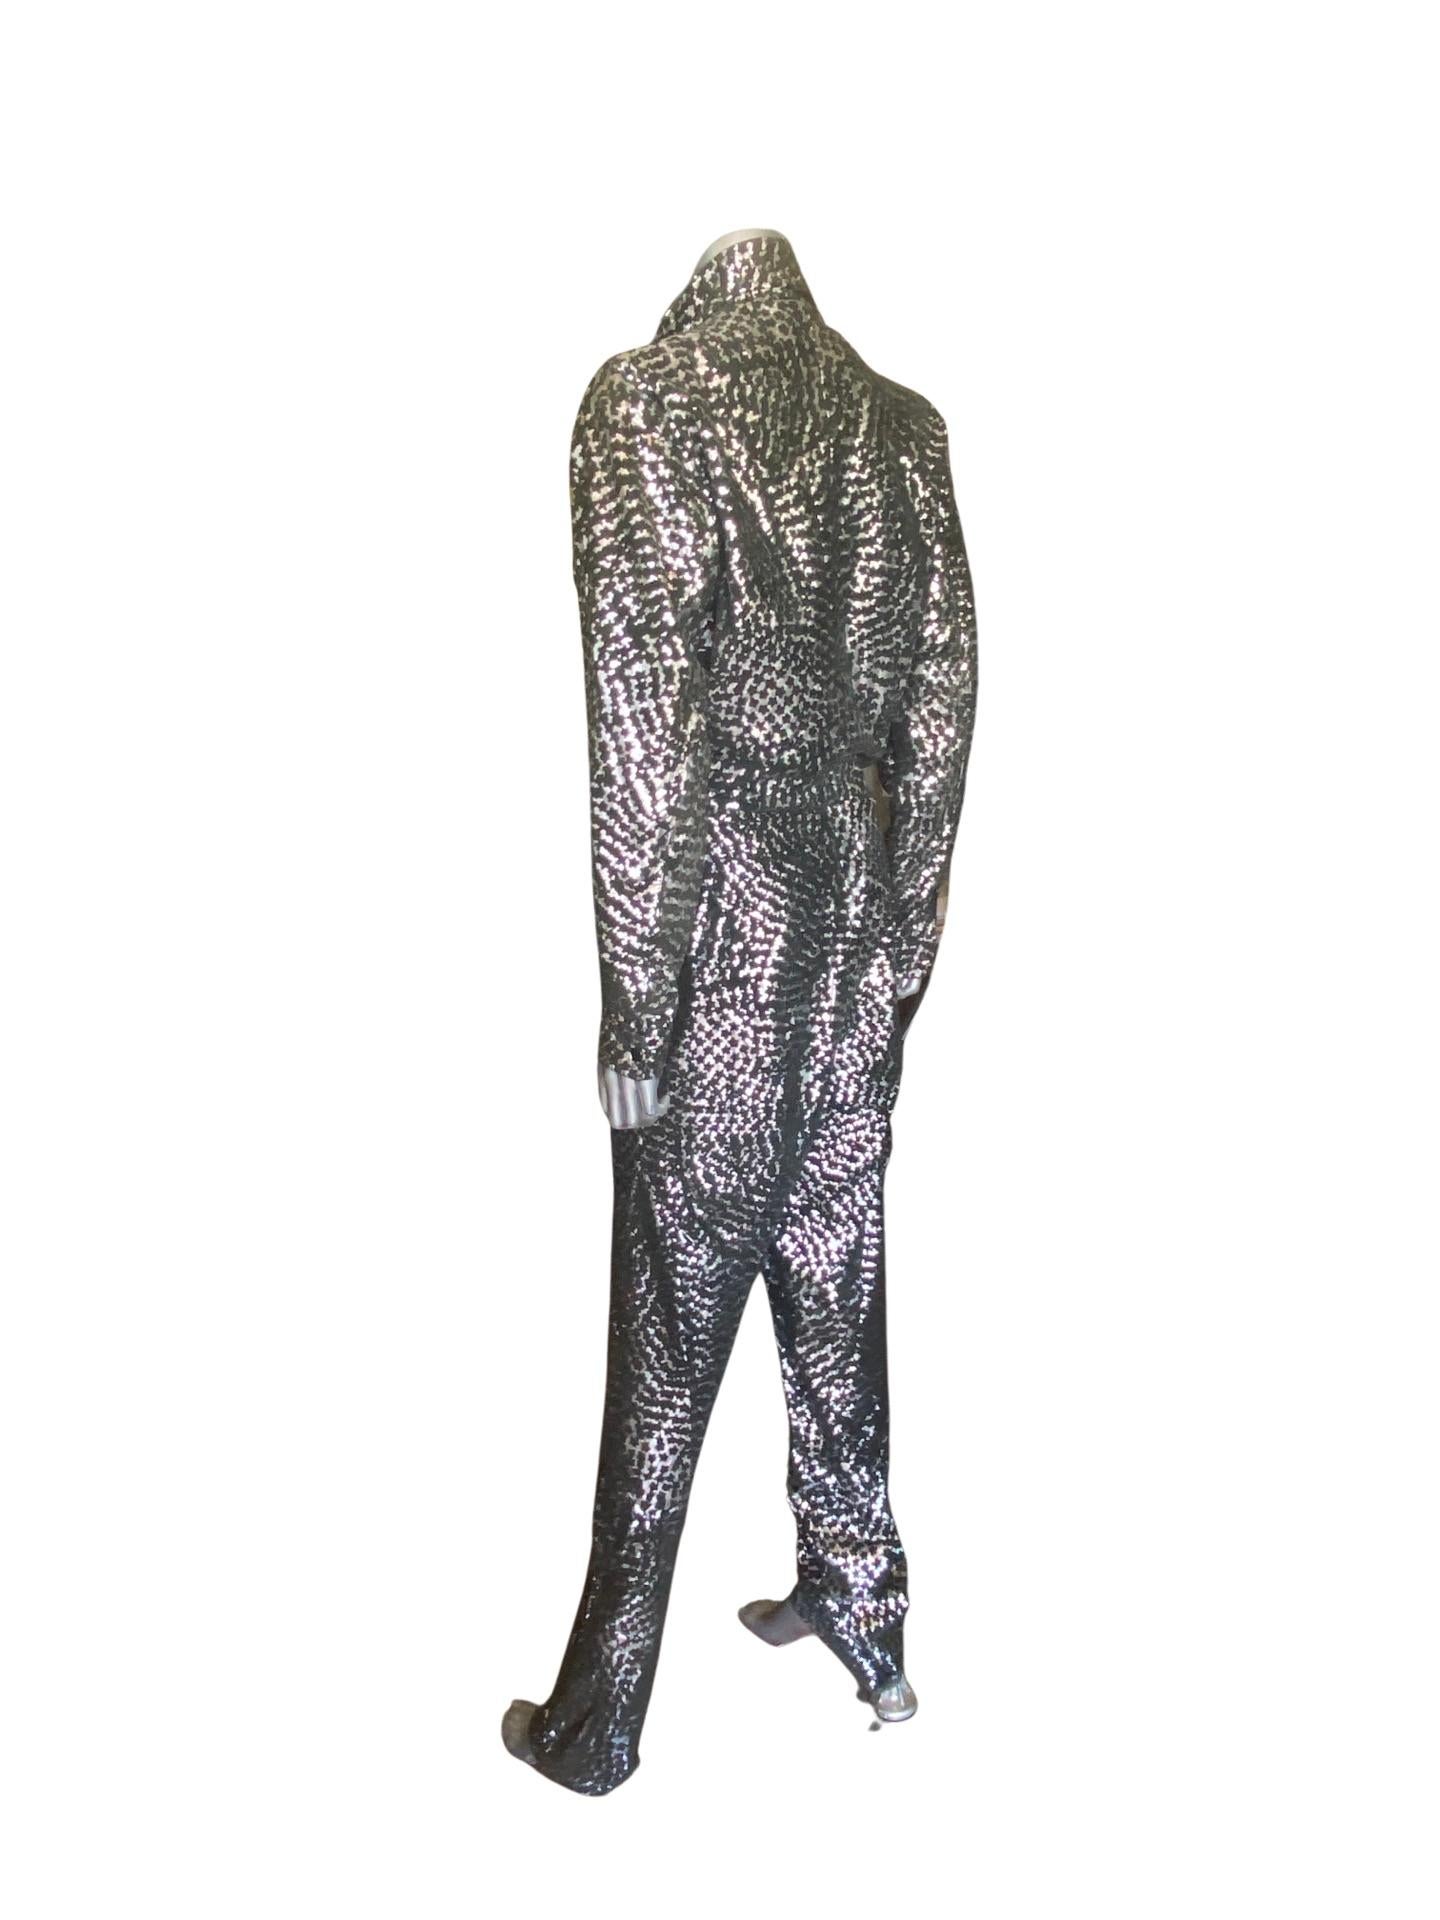 Vintage Italian Black Leather and Silver Metallic Glam Print Jumpsuit, Size 10 For Sale 4